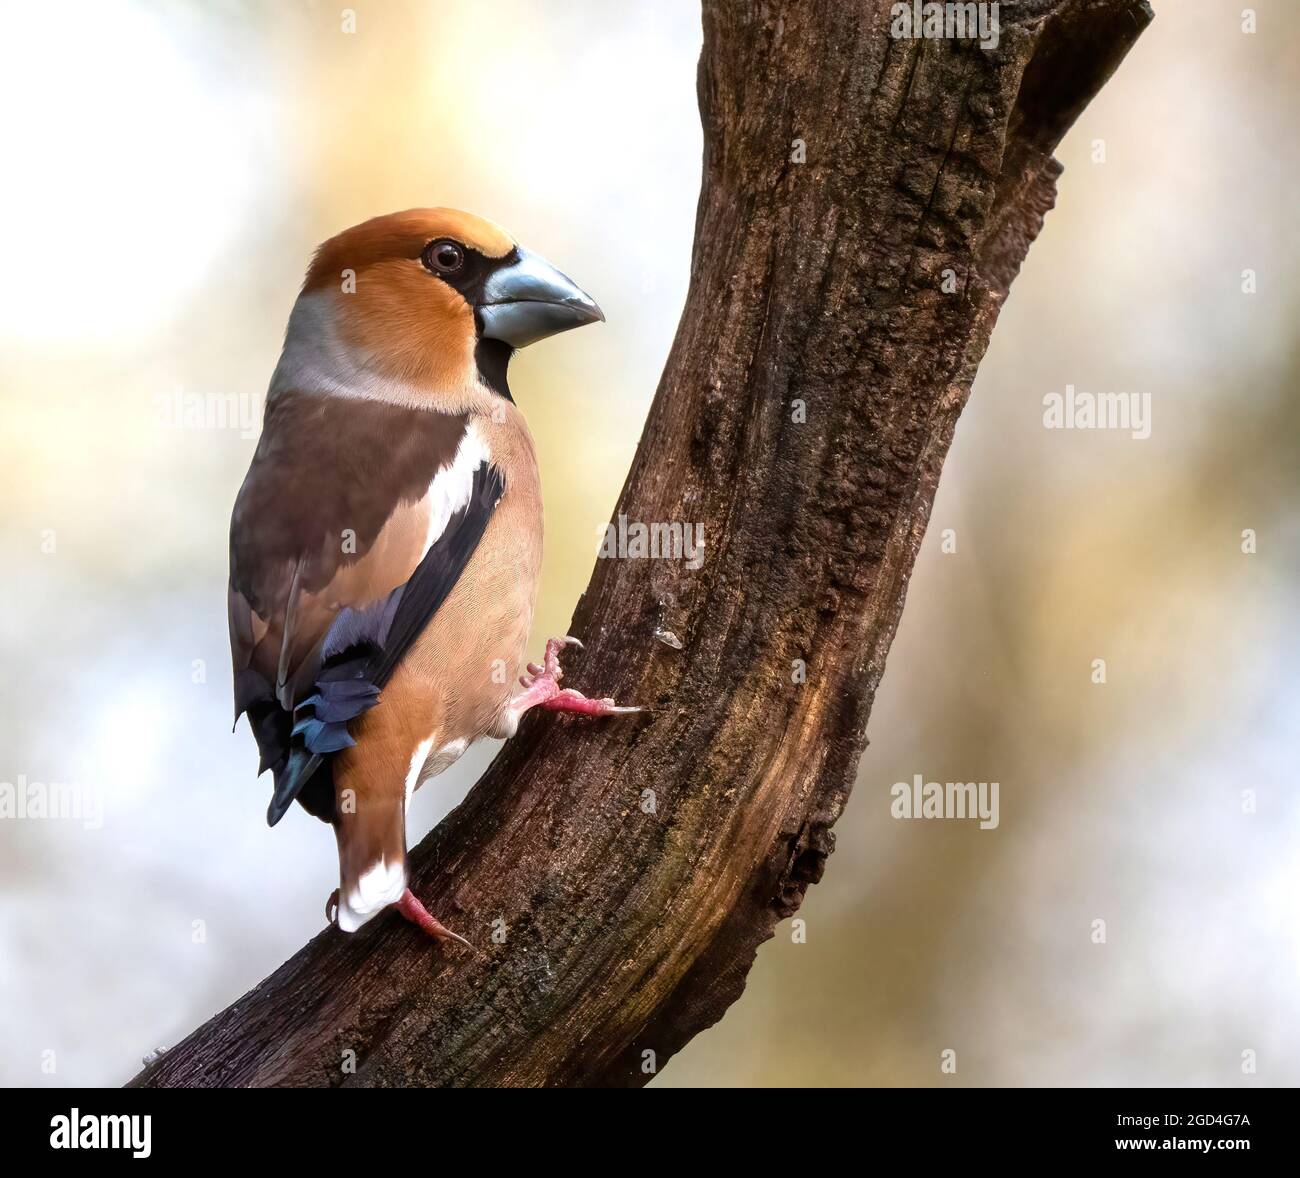 Hawfinch (Coccothraustes coccothraustes) perched on a branch Stock Photo